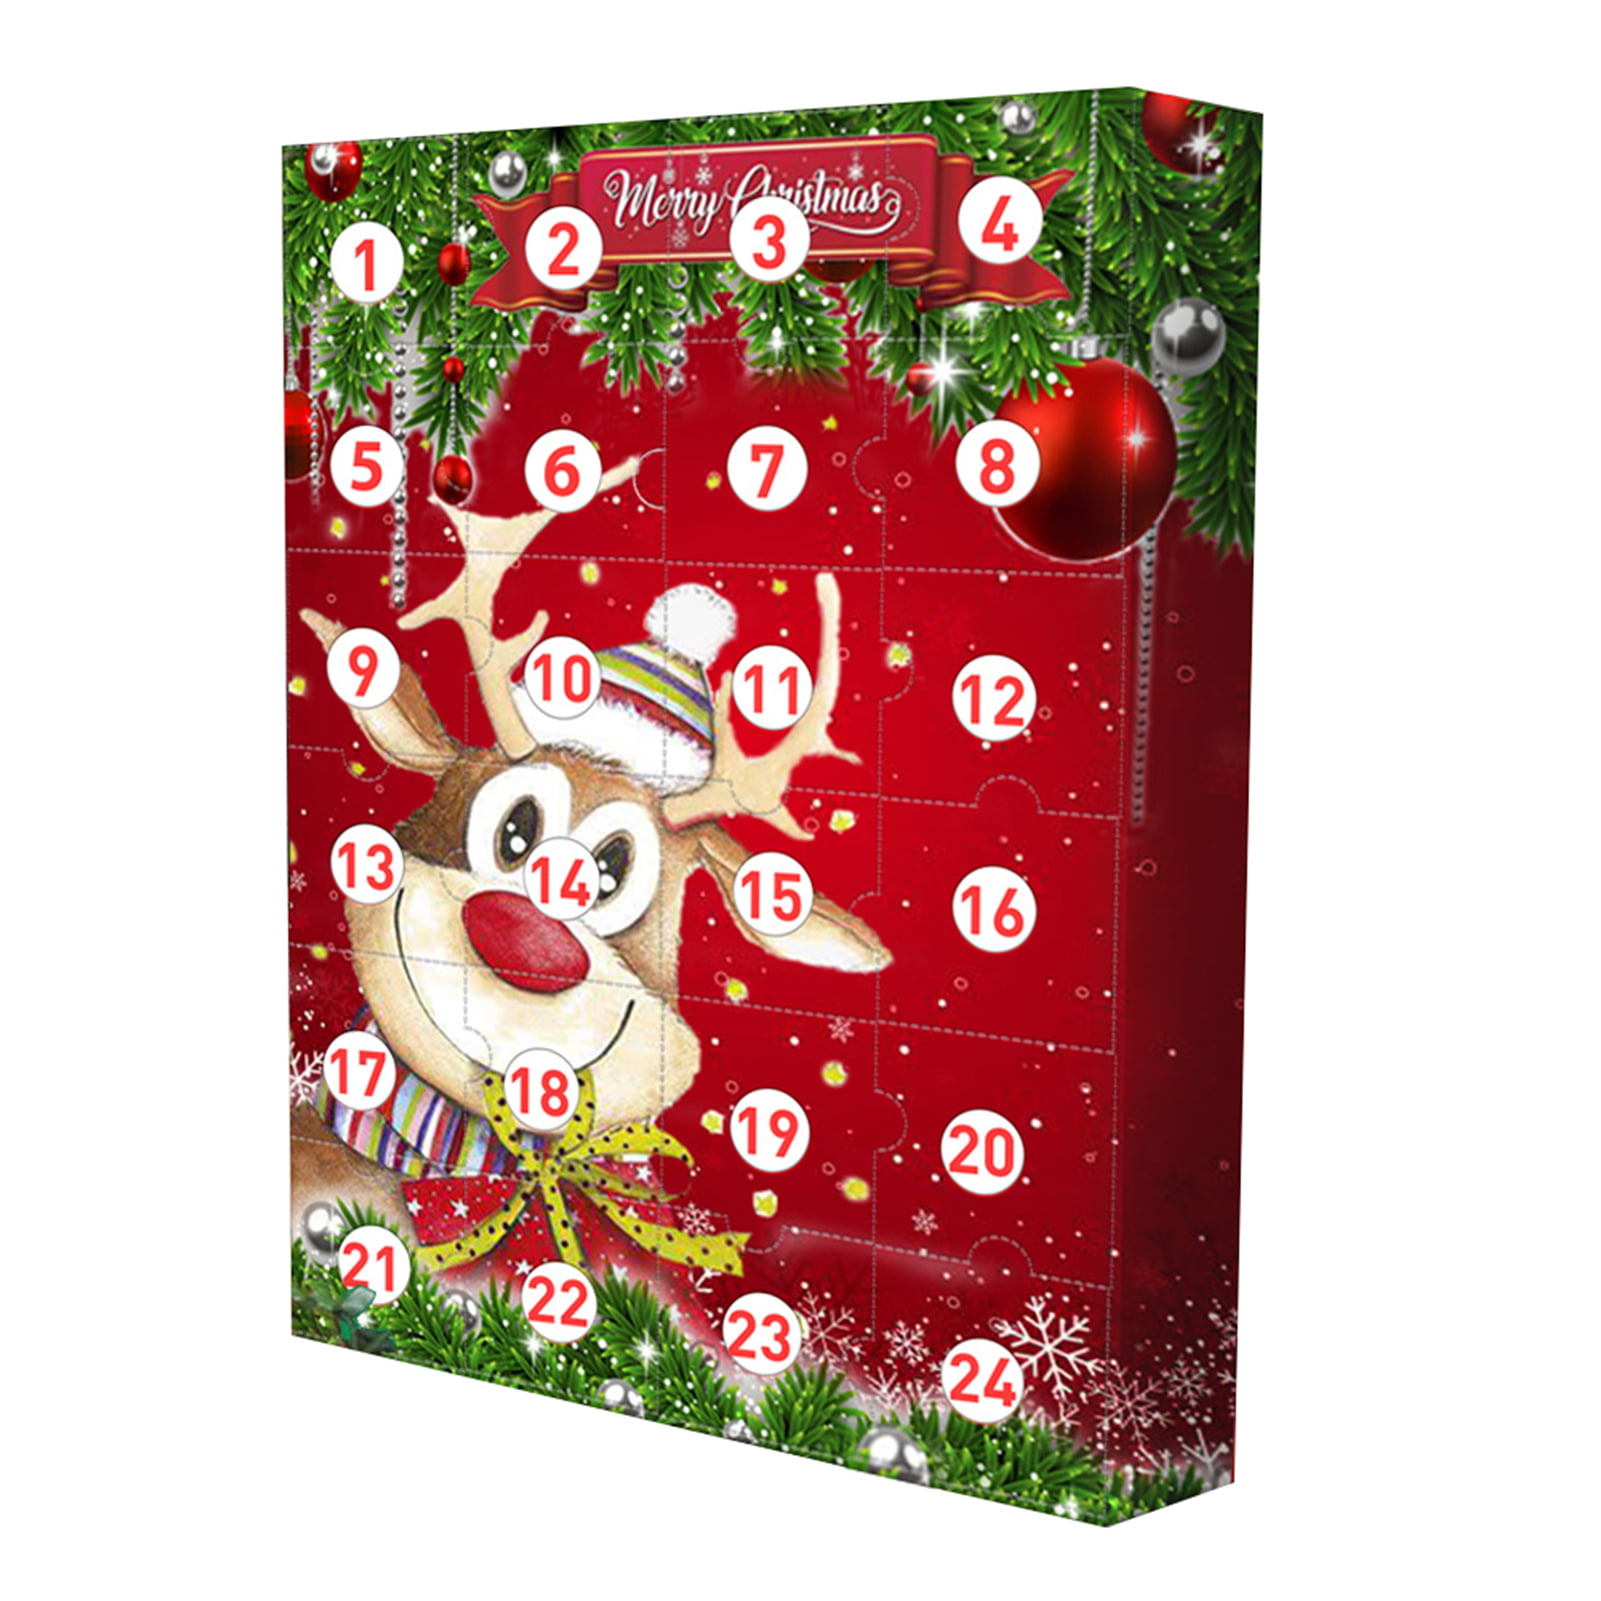 24x BROWN ADVENT CALENDAR COUNTDOWN TO CHRISTMAS FILL YOURSELF ACTIVITY BOX BAG 